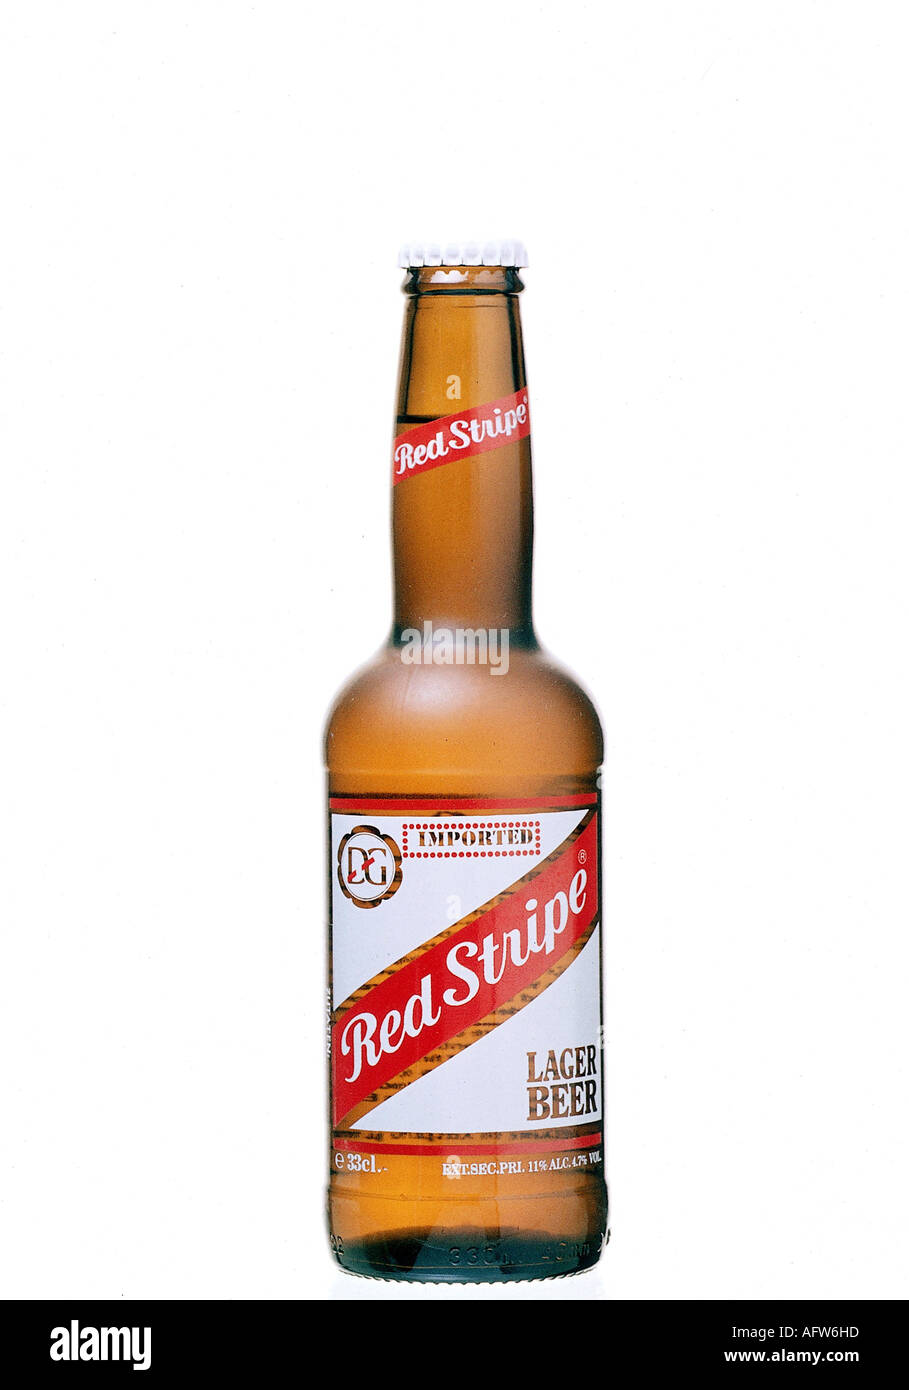 food and beverages, alcohol, beer, bottle "Red Stripe Lager Beer", Desnoes and Geddes, Jamaica, bottles, Additional-Rights-Clearance-Info-Not-Available Stock Photo